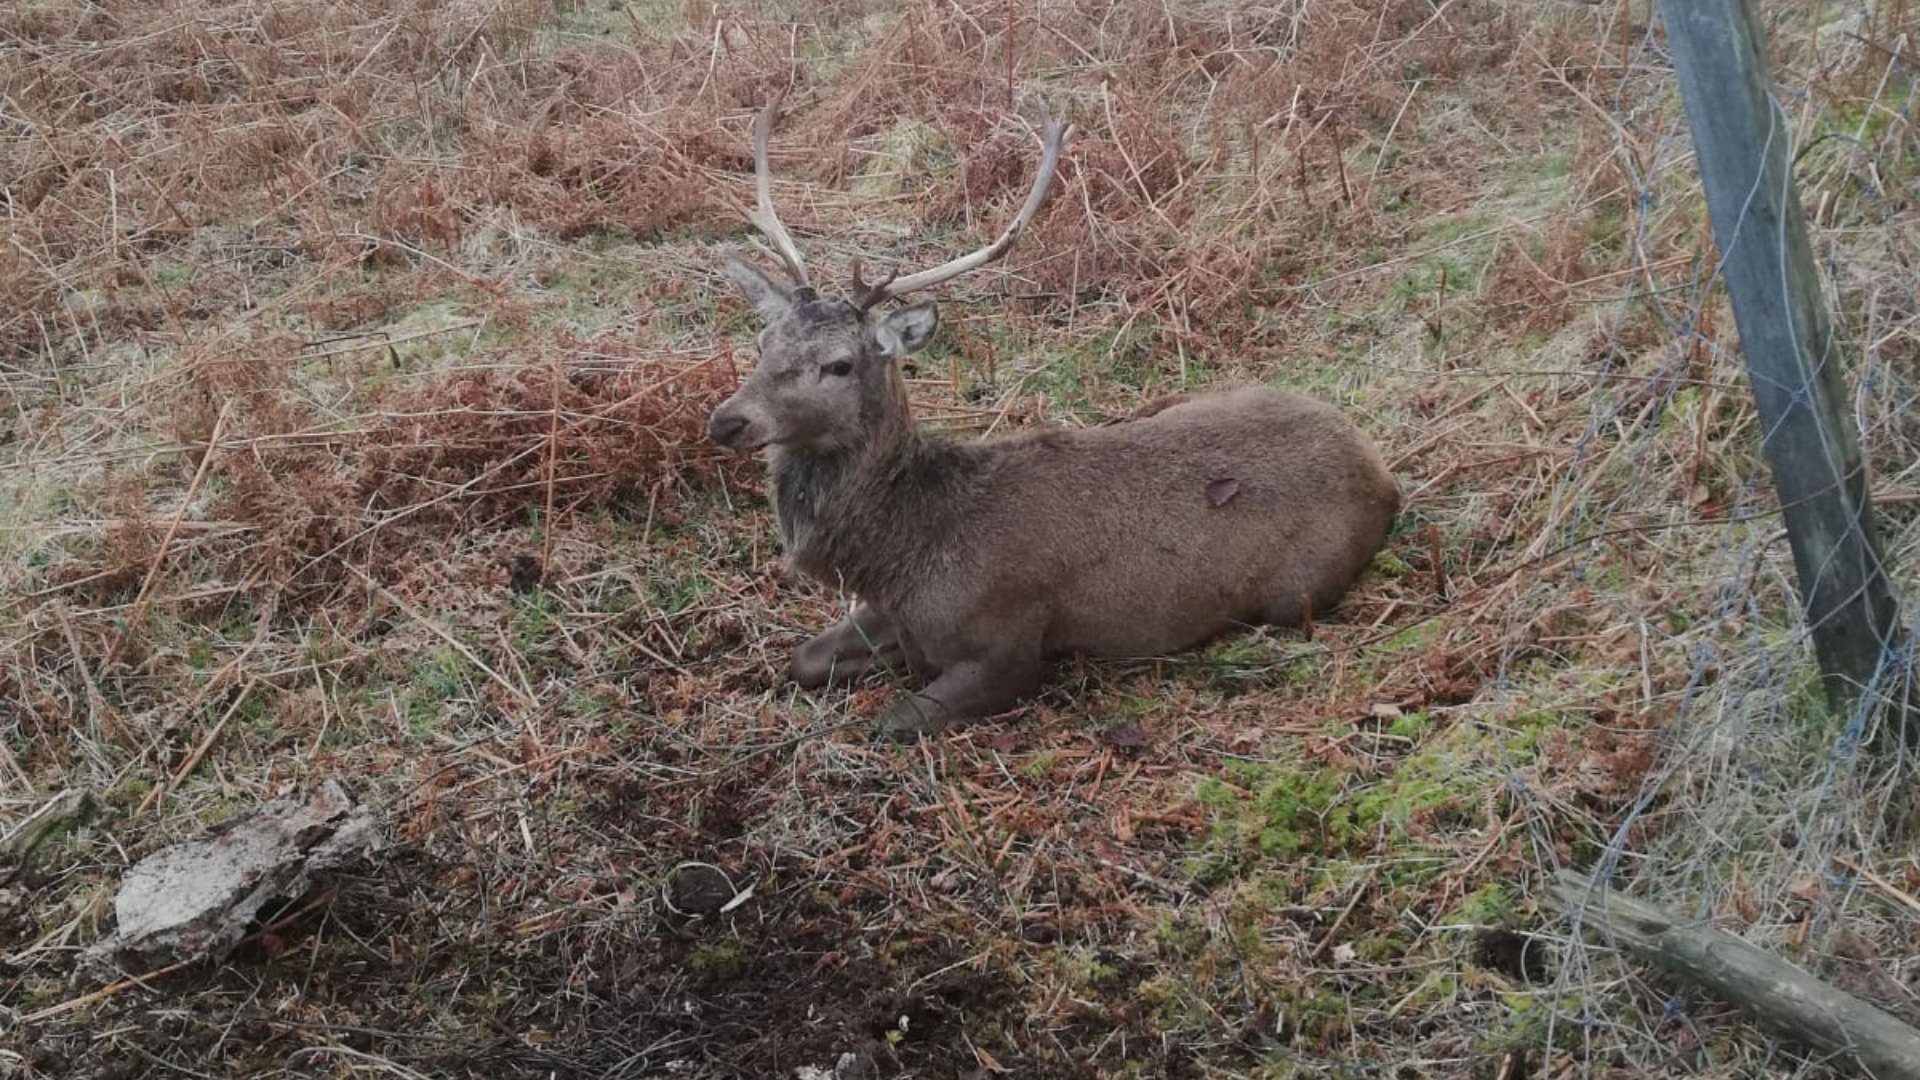 The stag was exhausted after the ordeal but slowly began to eat again.